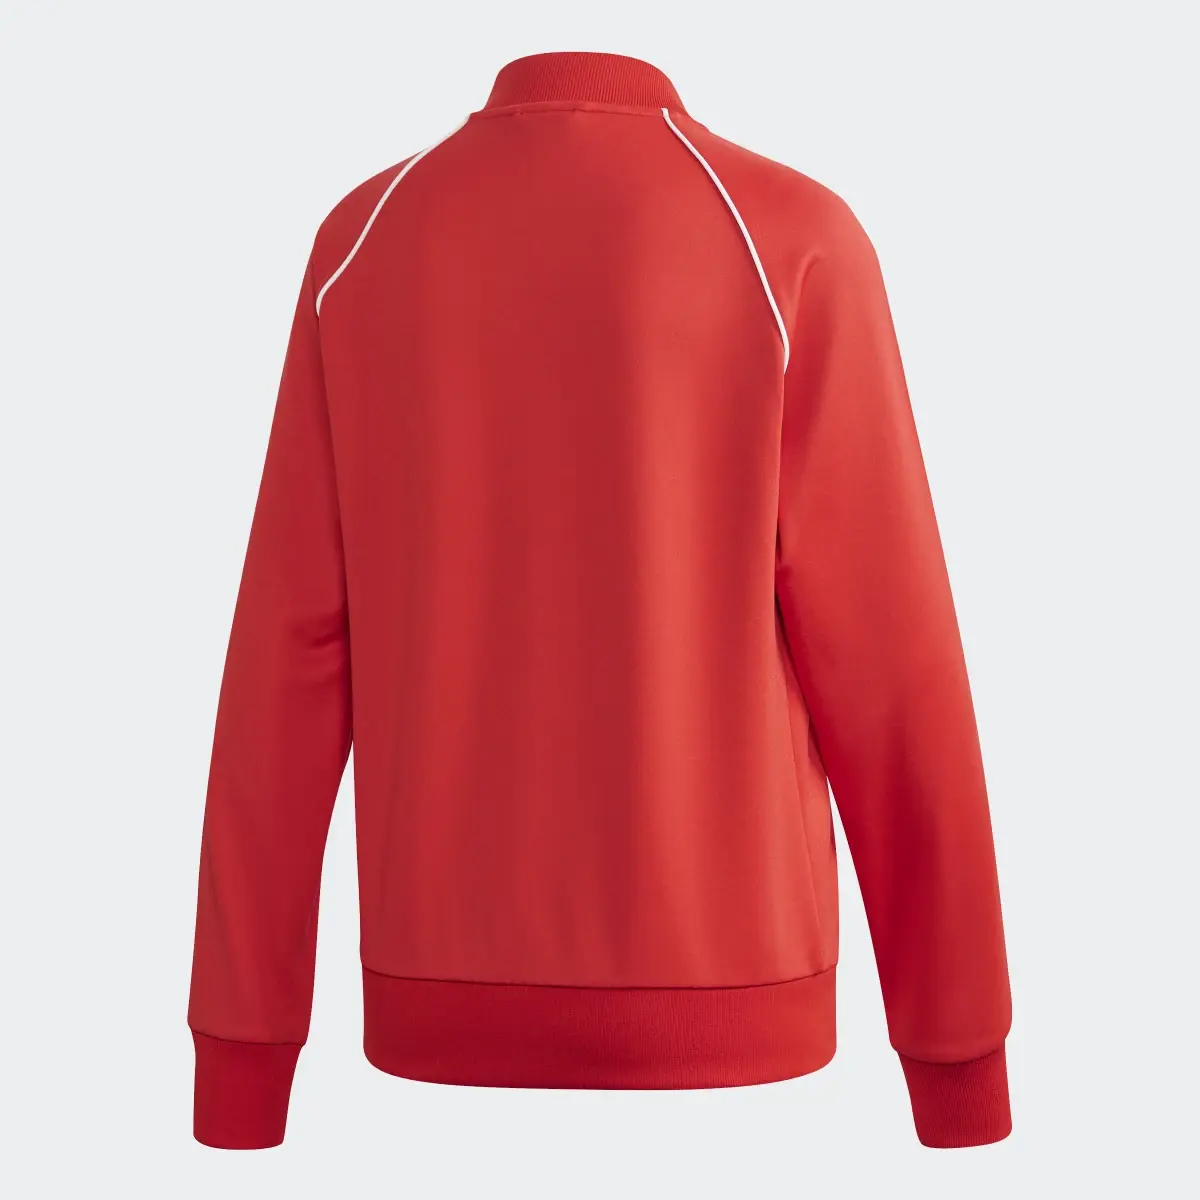 Adidas SST Track Top. 2